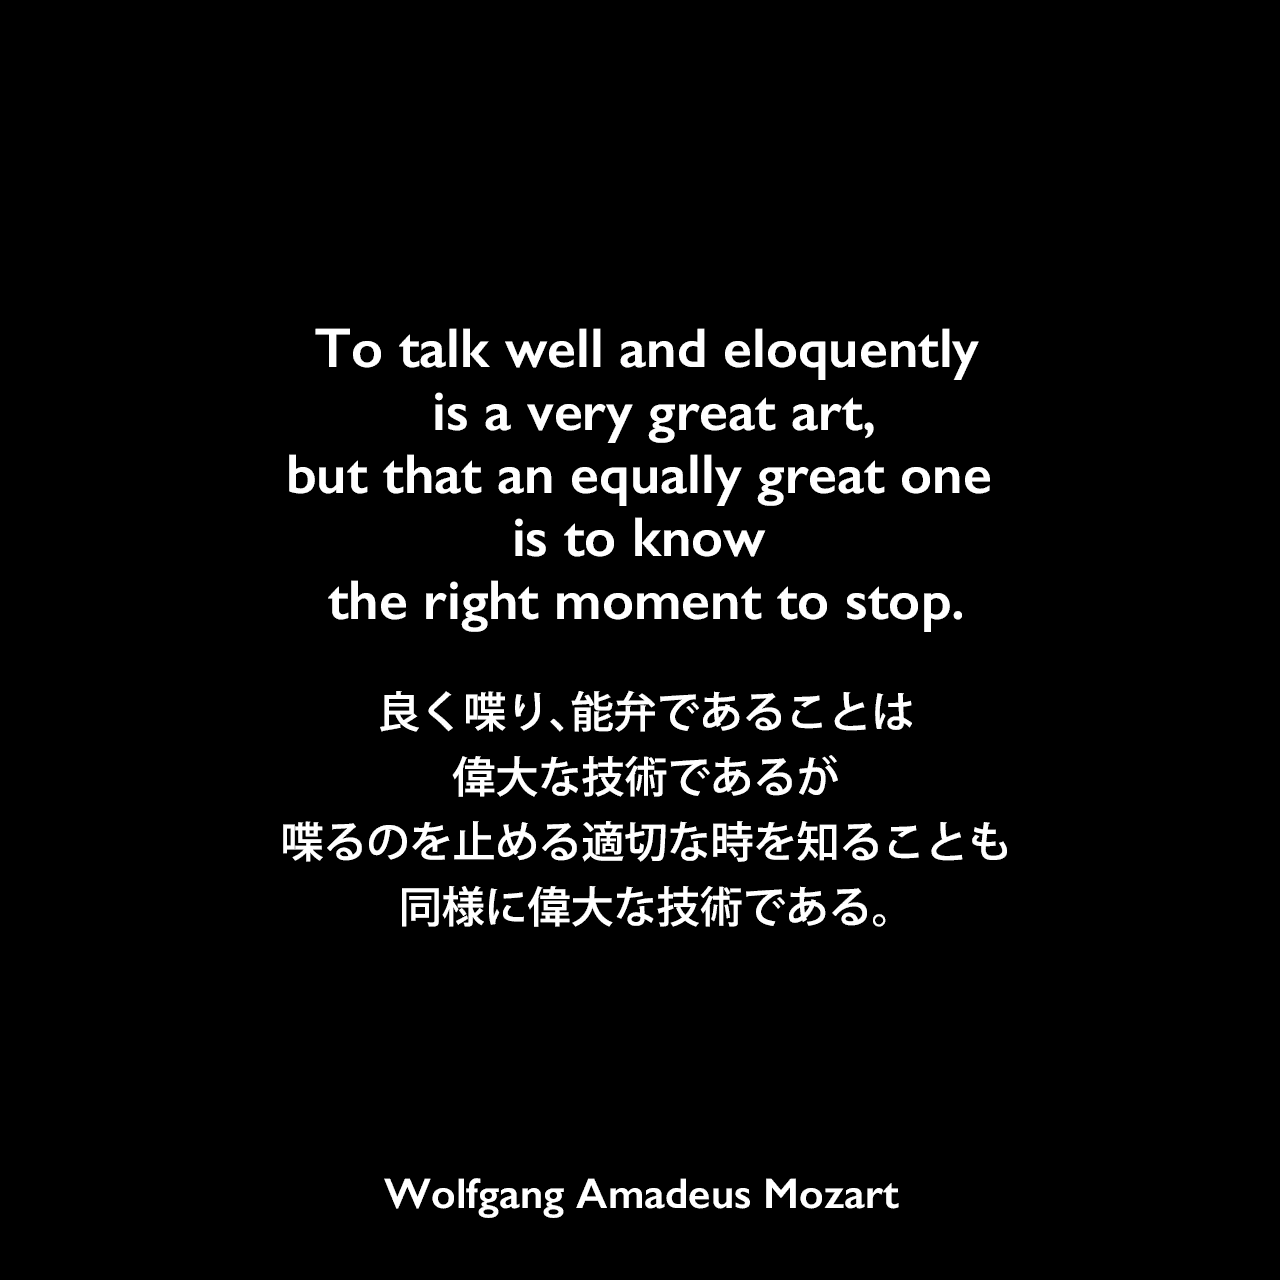 To talk well and eloquently is a very great art, but that an equally great one is to know the right moment to stop.良く喋り、能弁であることは、偉大な技術であるが、喋るのを止める適切な時を知ることも、同様に偉大な技術である。Wolfgang Amadeus Mozart